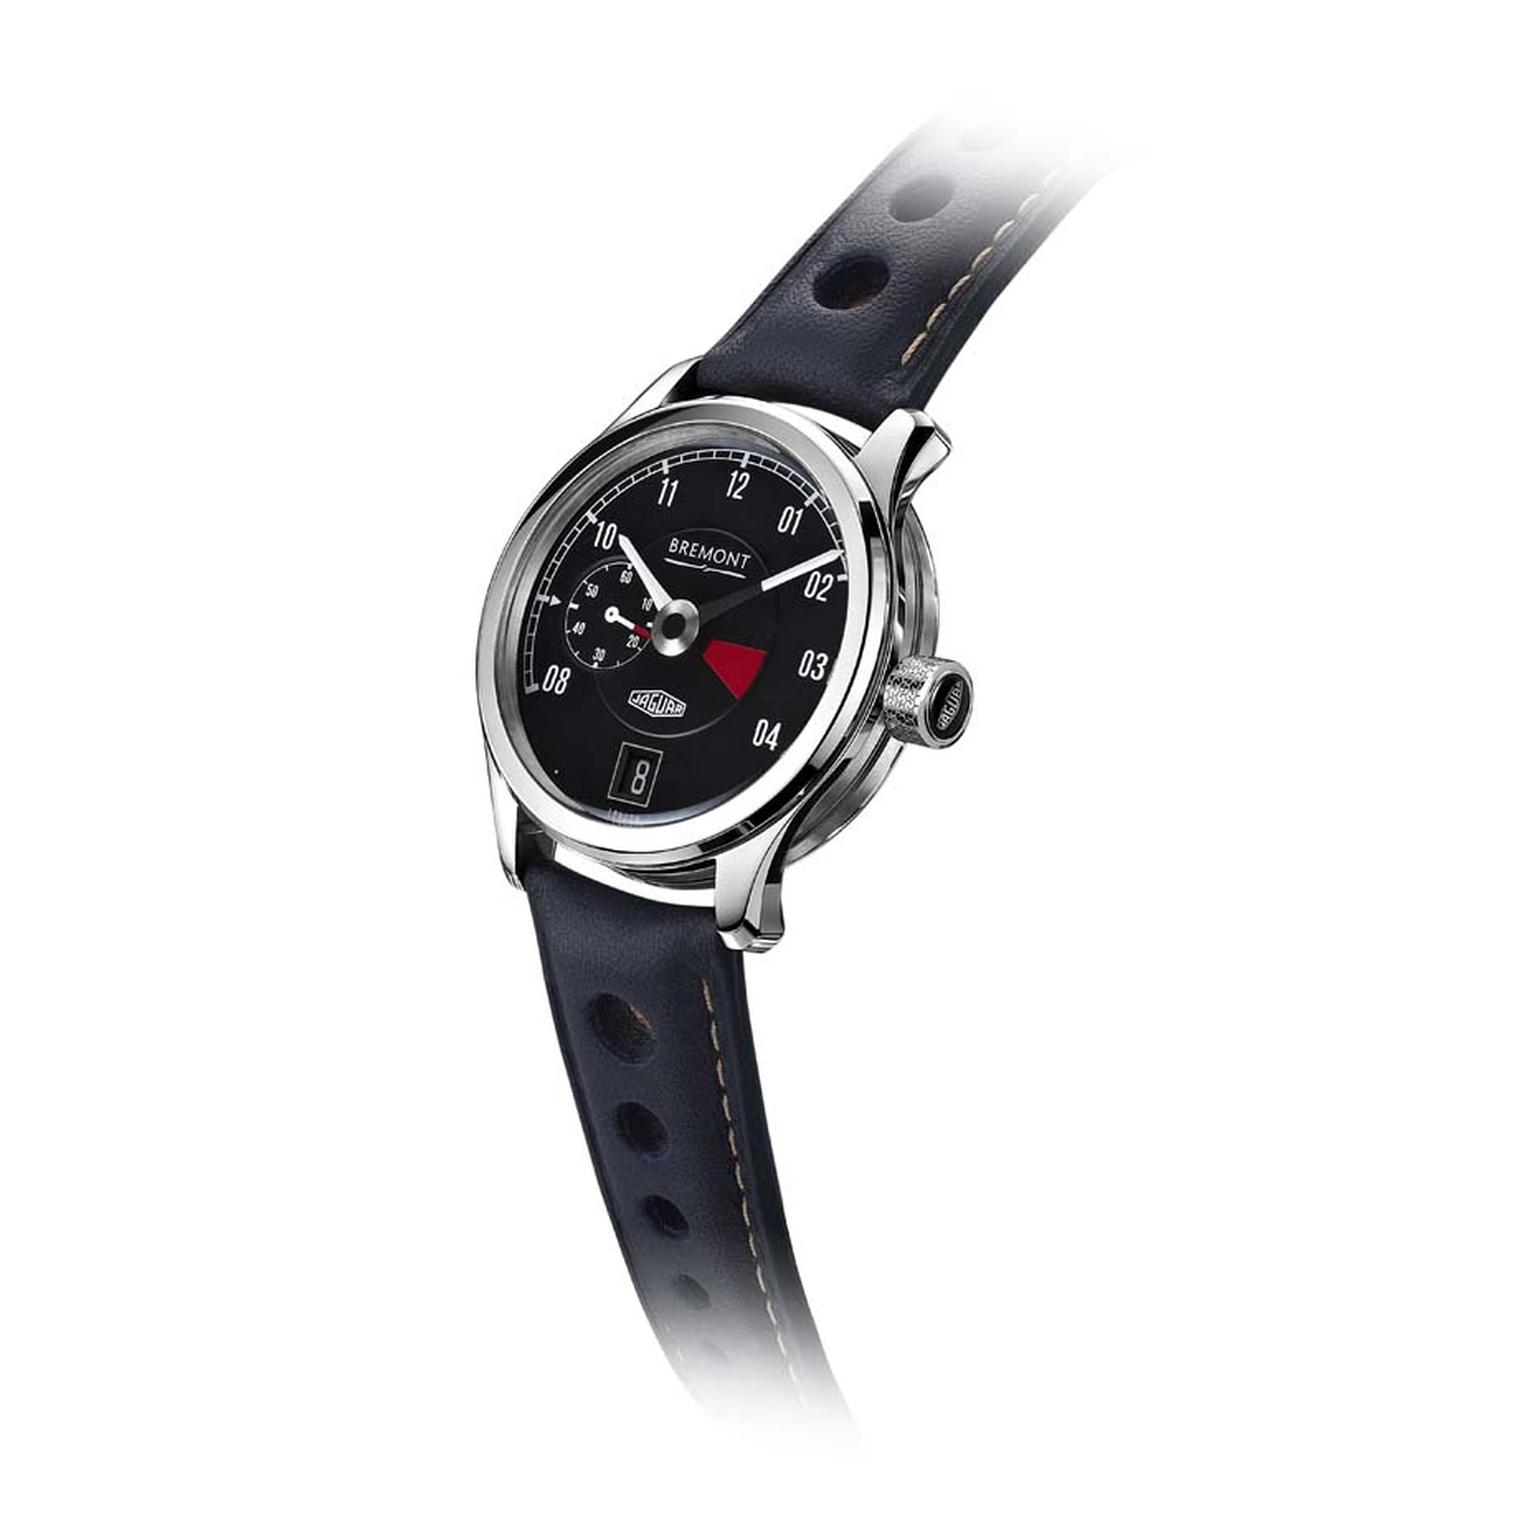 Bremont MKI watch takes design cues from the Jaguar E-Type 1961 racing car with a tachometer-inspired dial, an off-set small seconds indicator, and a red line quadrant between 3 and 4 o'clock.